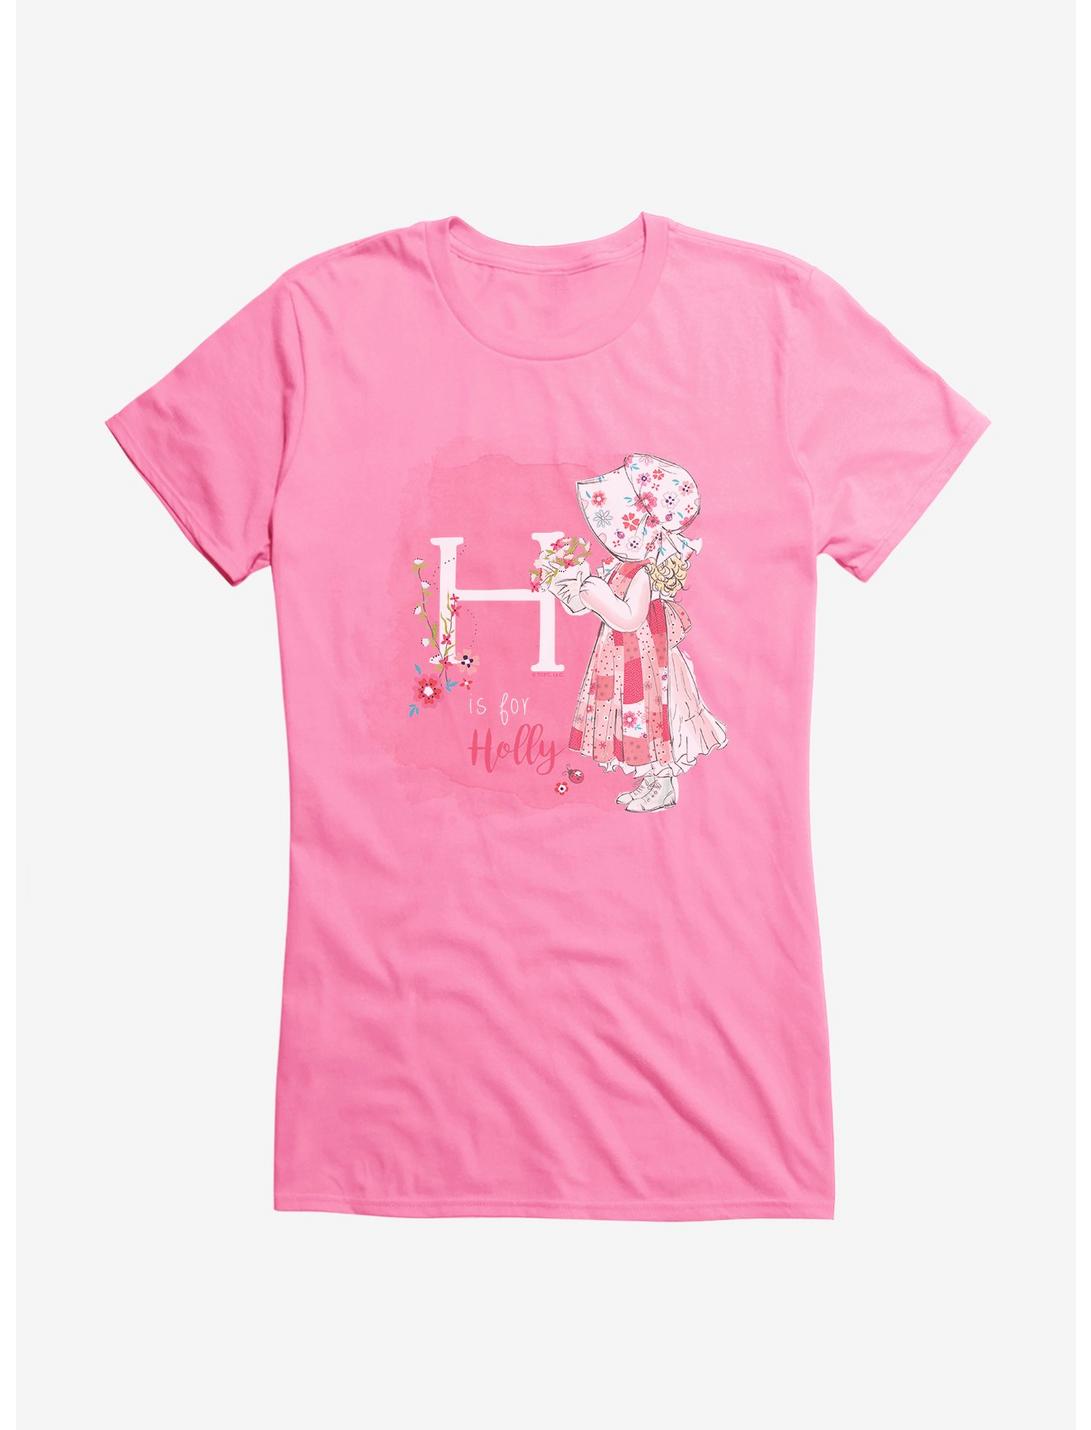 Holly Hobbie H Is For Holly Girls T-Shirt, CHARITY PINK, hi-res